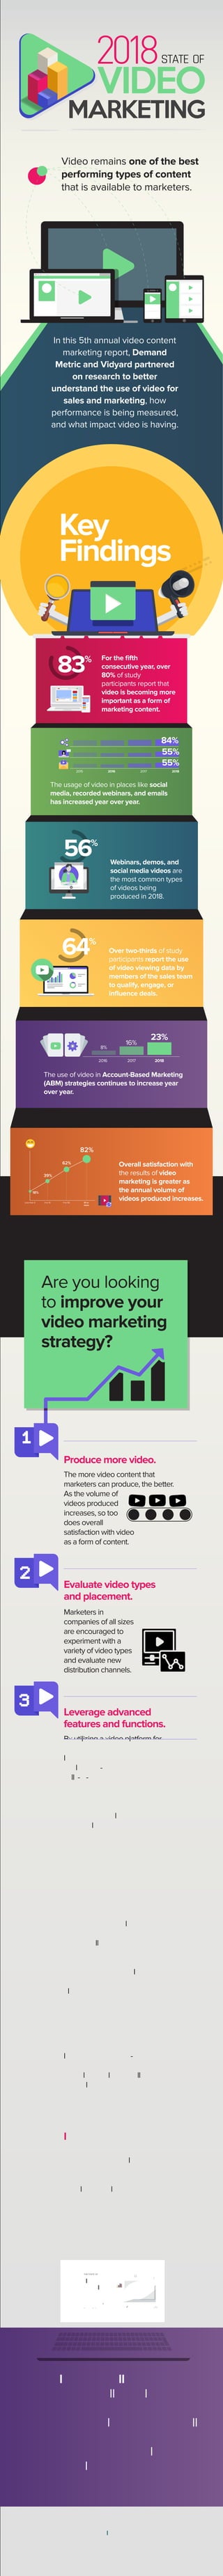 In this 5th annual video content
marketing report, Demand
Metric and Vidyard partnered
on research to better
understand the use of video for
sales and marketing, how
performance is being measured,
and what impact video is having.
Benchmark Study Report
November 2018
THE STATE OF
VIDEO
MARKETING
2018
www.demandmetric.com www.vidyard.com
Download the full report today
for the full detailed
recommendations, and discover
many additional insights that will
empower your video marketing
strategy with the tools and
technology you need to
increase revenue.
The more video content that
marketers can produce, the better.
As the volume of
videos produced
increases, so too
does overall
satisfaction with video
as a form of content.
Produce more video.
Marketers in
companies of all sizes
are encouraged to
experiment with a
variety of video types
and evaluate new
distribution channels.
Evaluate video types
and placement.
By utilizing a video platform for
business, advanced features
like video performance
analytics, in-video
calls-to-action, and
syncing viewer
engagement data to
marketing automation
or CRM are easily
accessible.
Leverage advanced
features and functions.
Satisfaction with video
marketing efforts
based on functionality
usage grew
dramatically in 2018.
Participants who use
advanced features and
reported that their ROI
is getting much better,
also continued to grow.
Experiment with new
features and functions.
Views by embedded
location, viewer drop-off
rates, and attribution to
the sales pipeline are all
examples of advanced
video metrics to track.
Track advanced metrics.
By integrating video
viewing data with sales
and marketing systems,
marketers can further
enable their sales and
marketing teams.
Integrate video viewing data.
Are you looking
to improve your
video marketing
strategy?
For the ﬁfth
consecutive year, over
80% of study
participants report that
video is becoming more
important as a form of
marketing content.
The usage of video in places like social
media, recorded webinars, and emails
has increased year over year.
Webinars, demos, and
social media videos are
the most common types
of videos being
produced in 2018.
Over two-thirds of study
participants report the use
of video viewing data by
members of the sales team
to qualify, engage, or
inﬂuence deals.
The use of video in Account-Based Marketing
(ABM) strategies continues to increase year
over year.
Overall satisfaction with
the results of video
marketing is greater as
the annual volume of
videos produced increases.
VIDEO
STATE OF
MARKETING
Video remains one of the best
performing types of content
that is available to marketers.
Key
Findings
83%
51 or
more
11 to 505 to 10Less than 5
82%
62%
39%
18%
64%
56%
2016 2017 2018
8%
16%
23%
2015 2016 2017 2018
84%
55%
55%
 